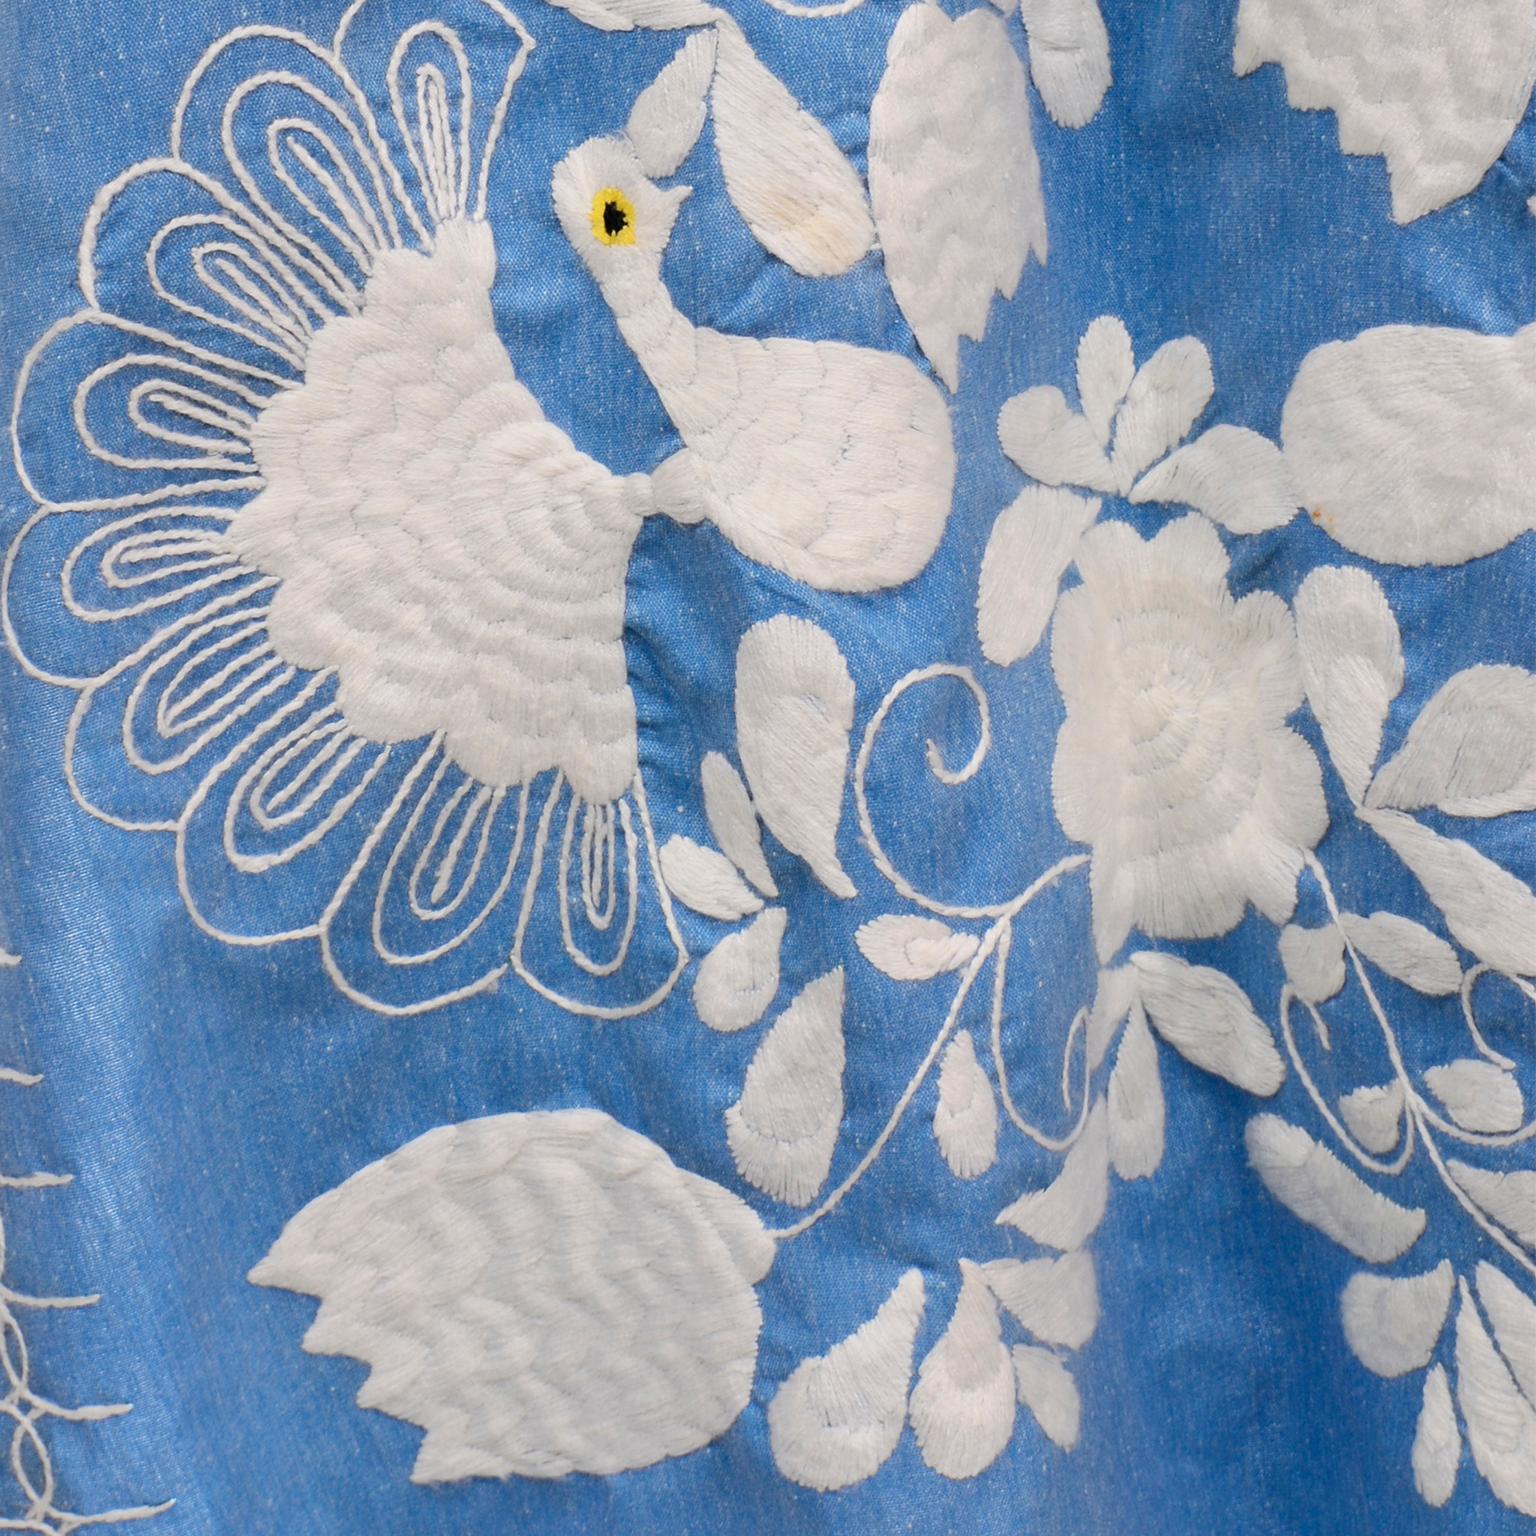 Vintage Embroidered Blue and White Caftan Dress With Floral Bird Motif 1